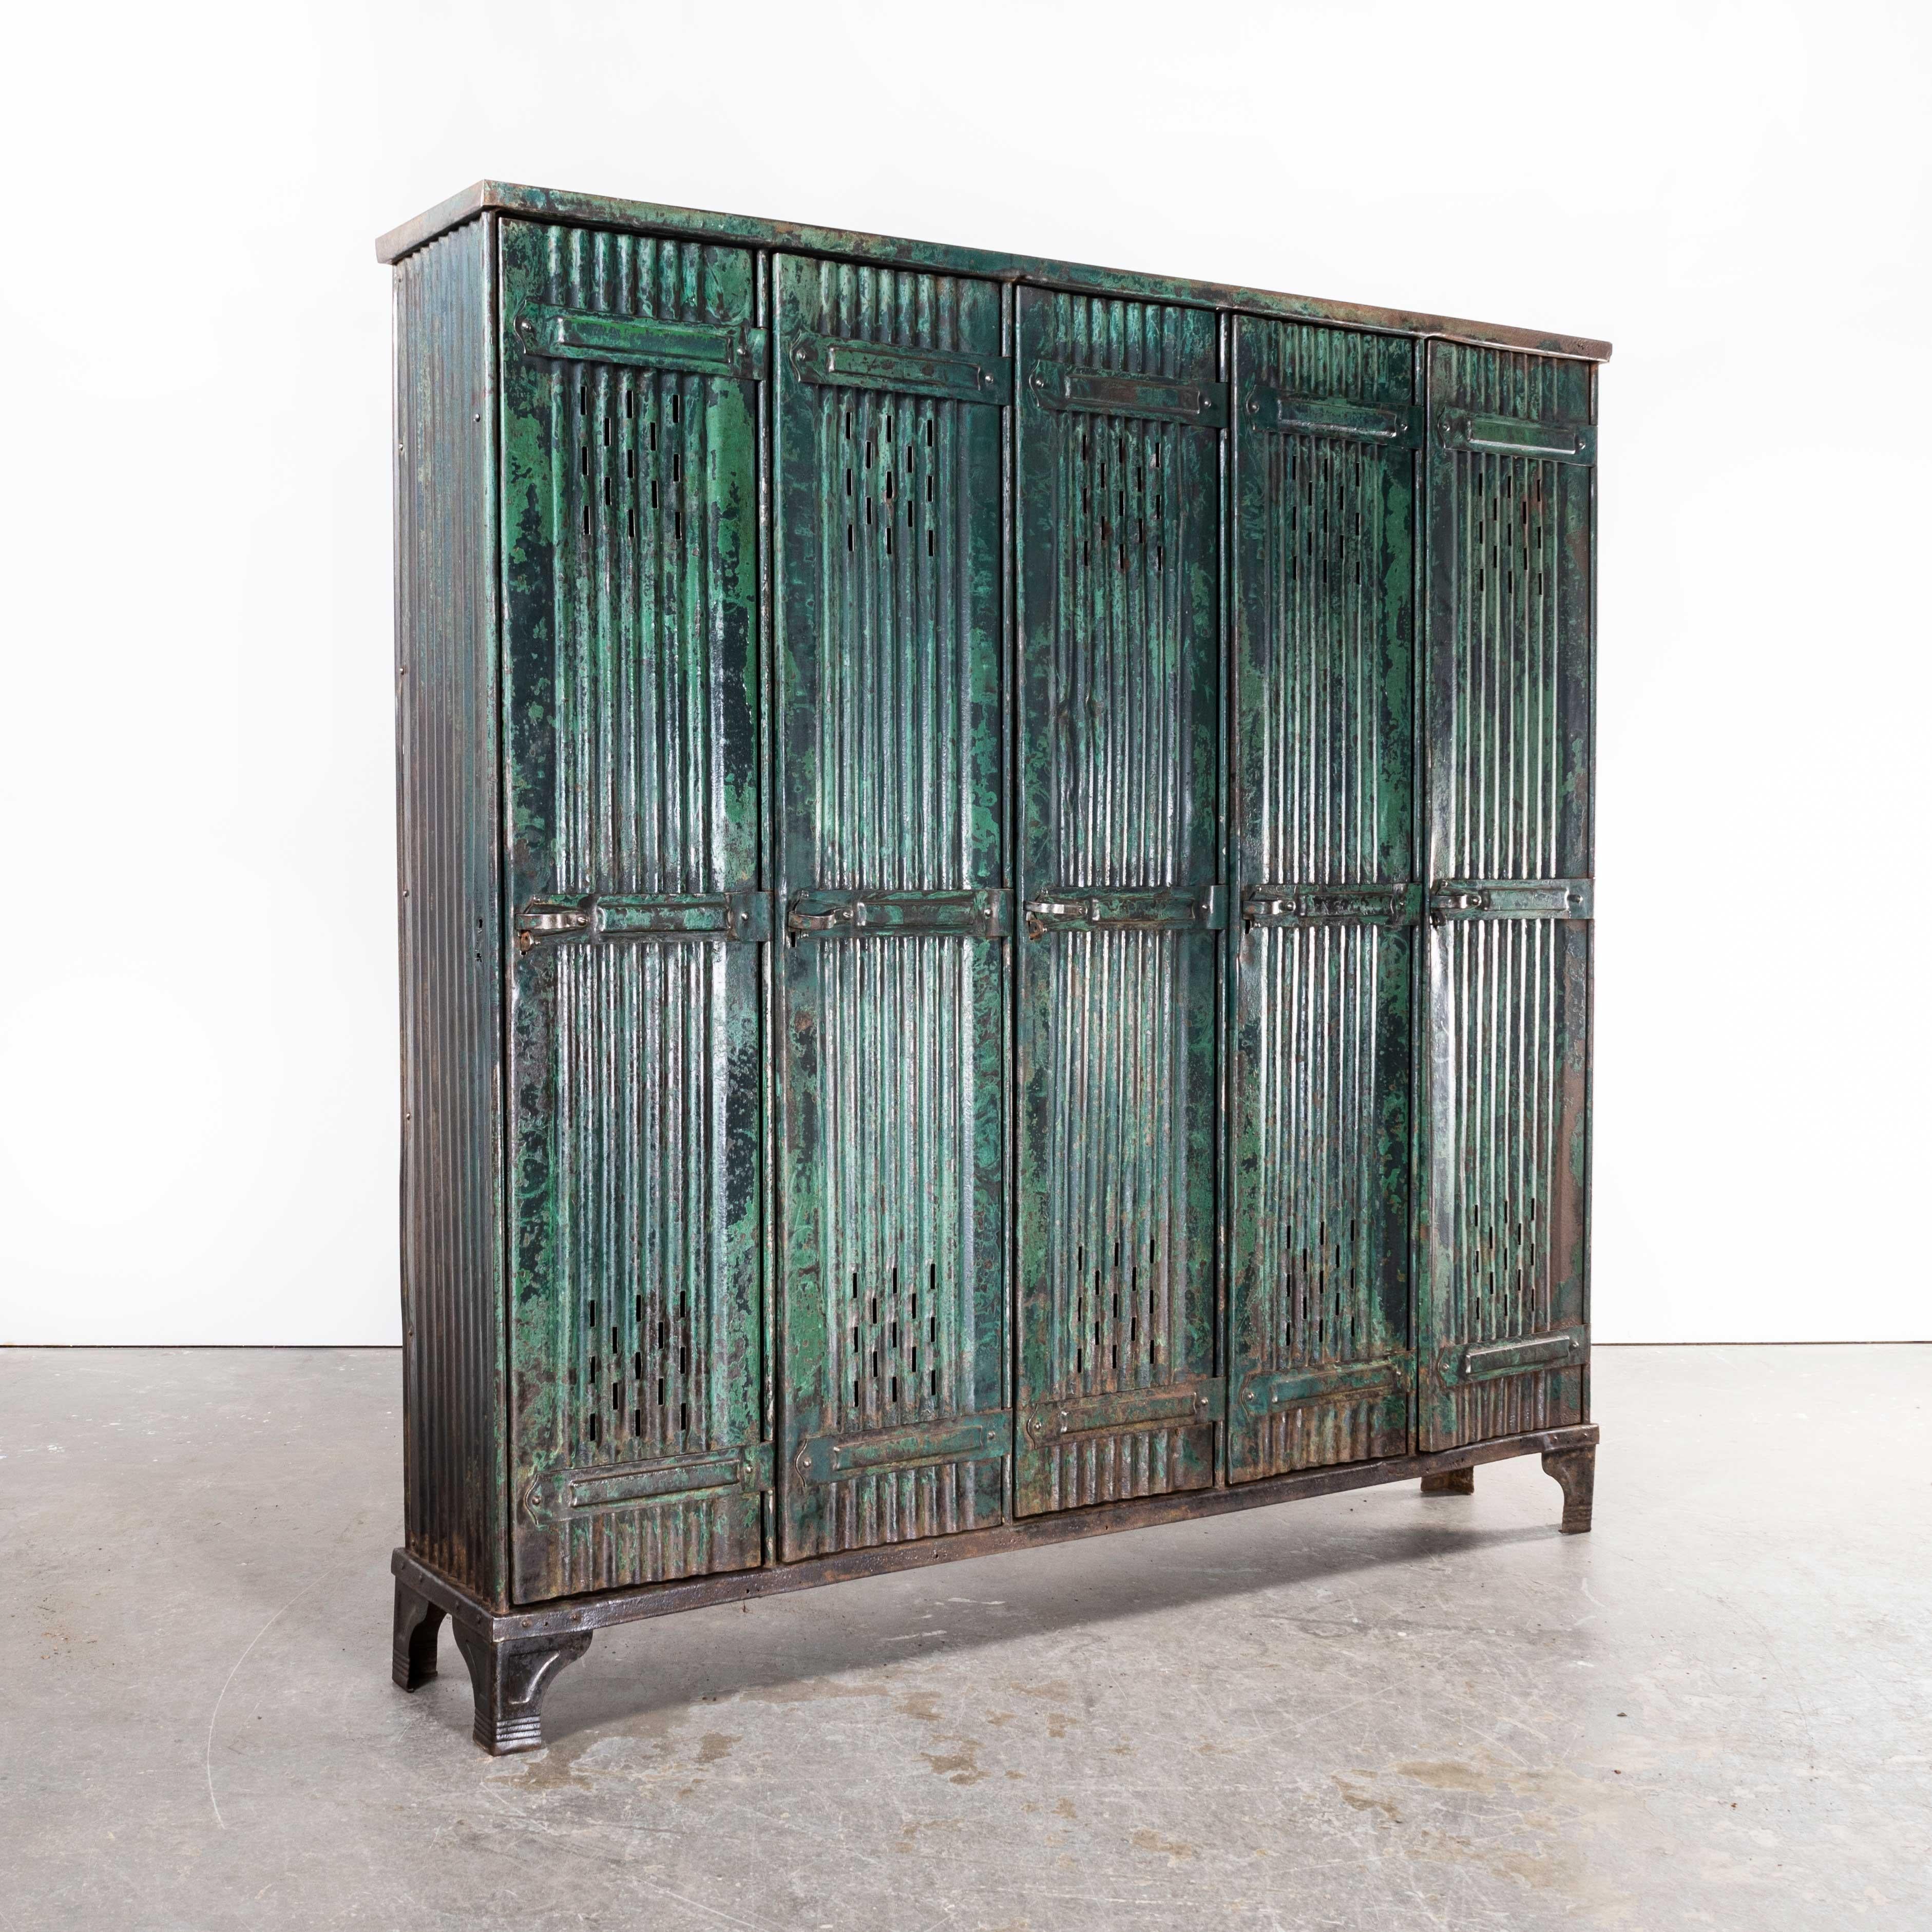 1930’s Original Forge de Strasbourg – Strafor – green five door locker
1930’s Original Forge de Strasbourg – Strafor – green five door locker. The Forge de Strasbourg was founded in the South East of France in 1919. They were one of the global